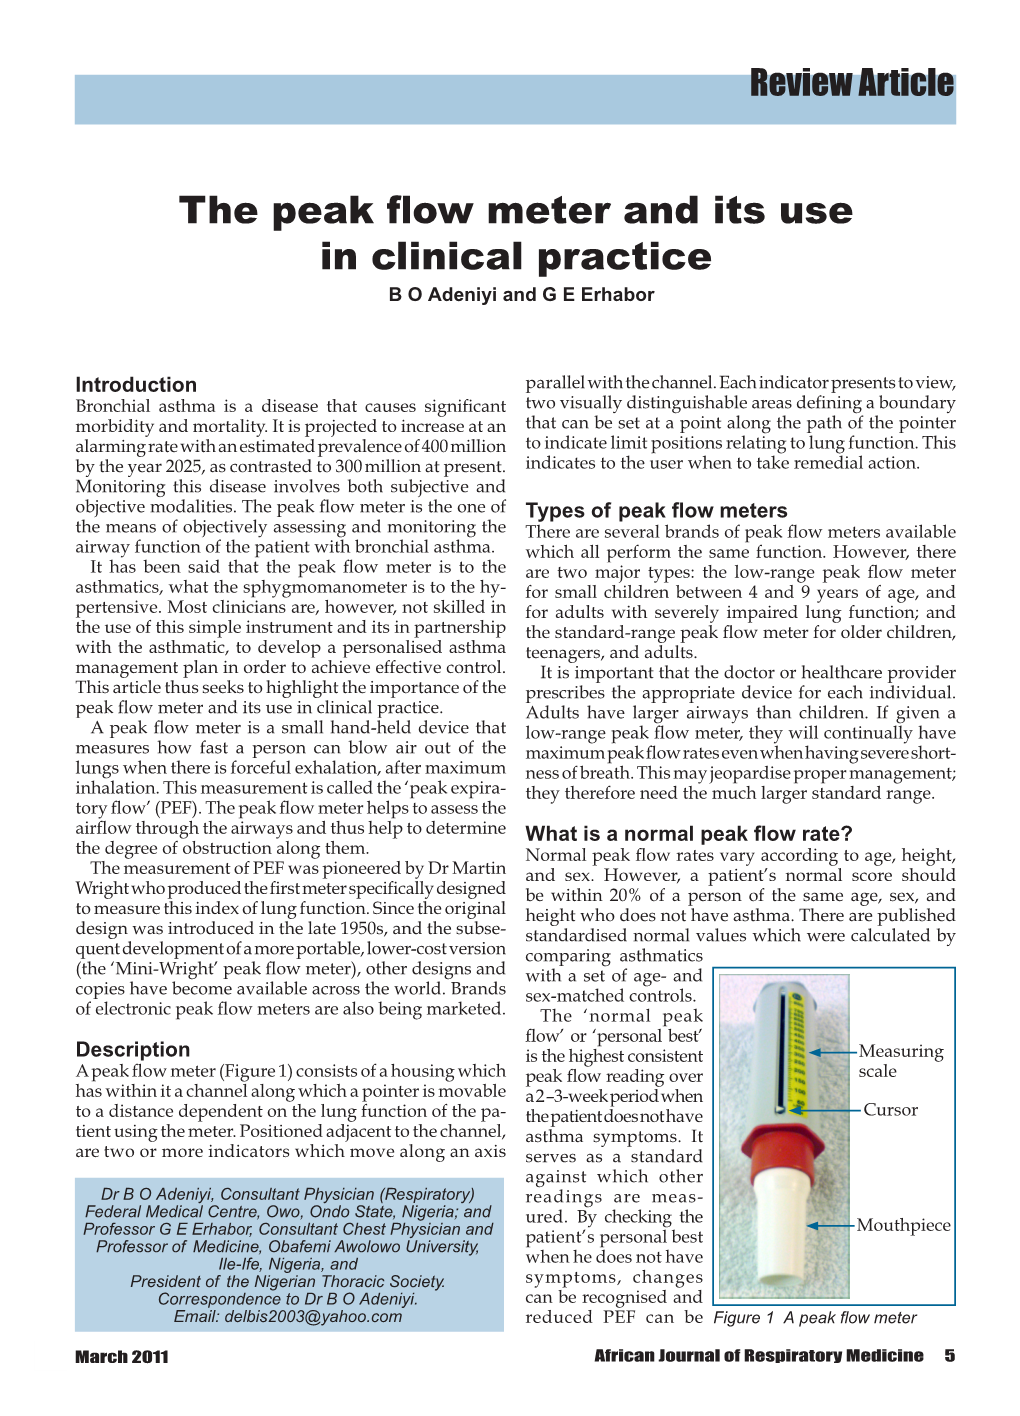 The Peak Flow Meter and Its Use in Clinical Practice B O Adeniyi and G E Erhabor